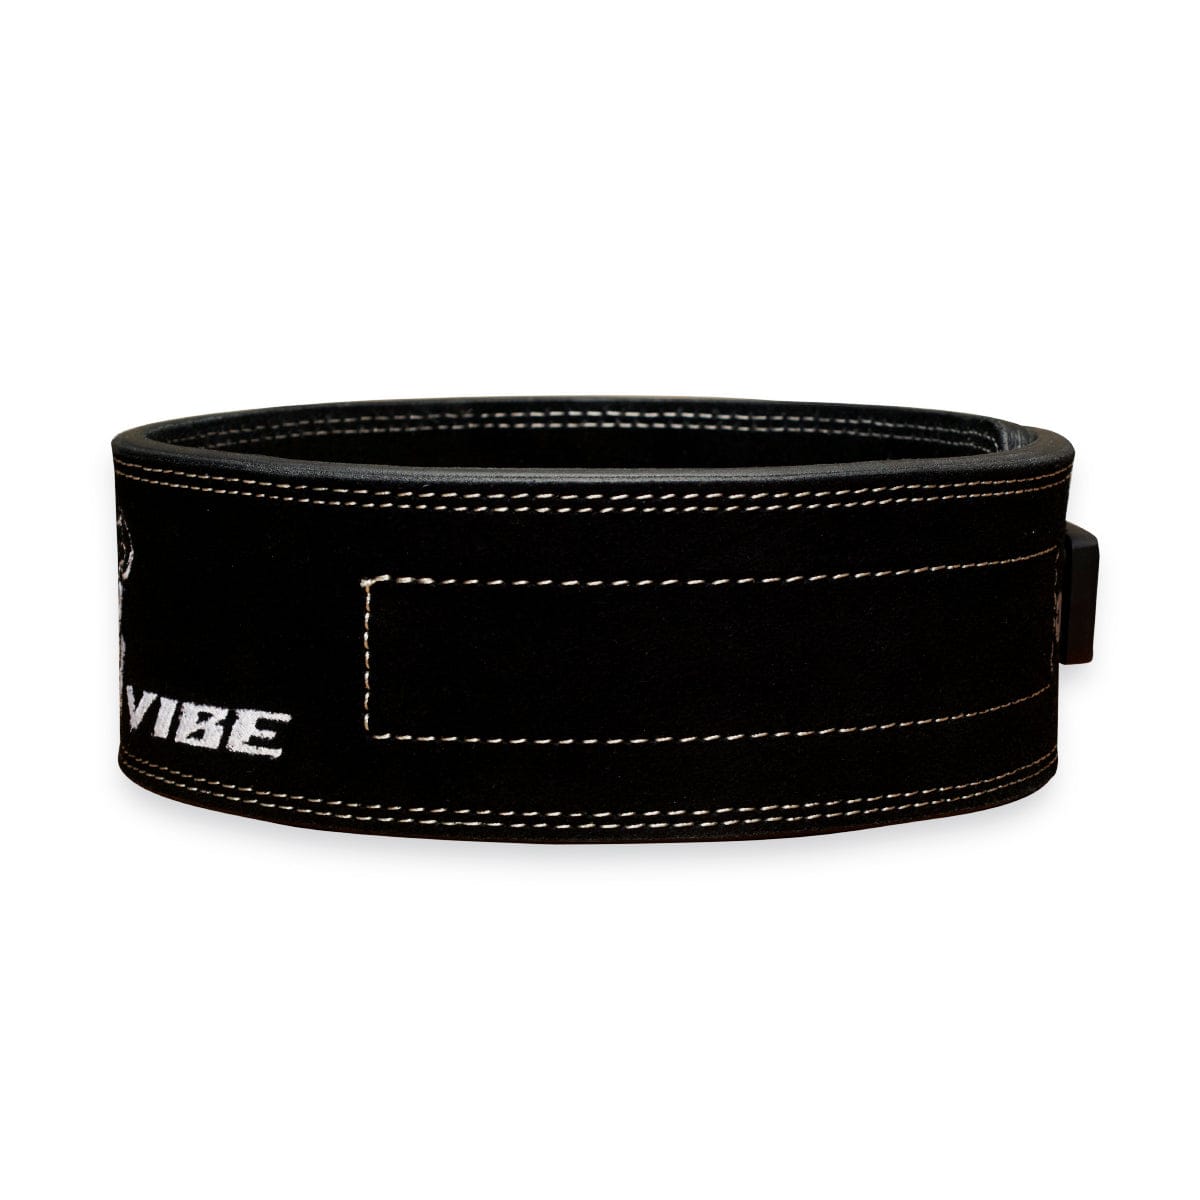 Weight Lifting Belt Power Lifting Belt 10mm Powerlifting Lever Belt 4 Inches Wide